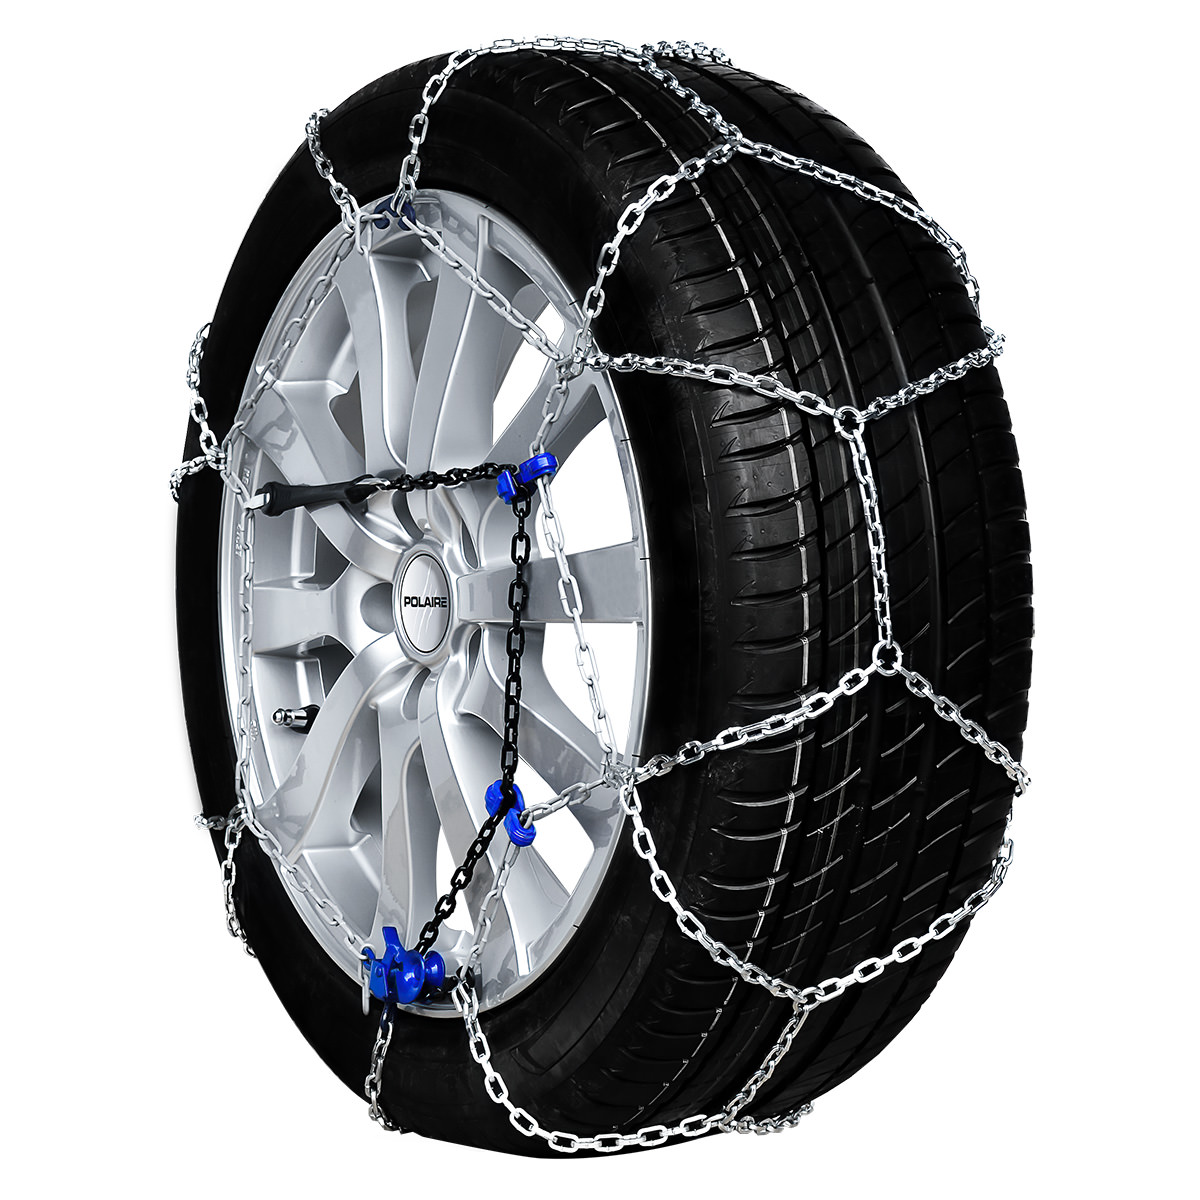 Chaines neige manuelle 9mm 235/45 R18 - 235 45 18 - 235 45 R18